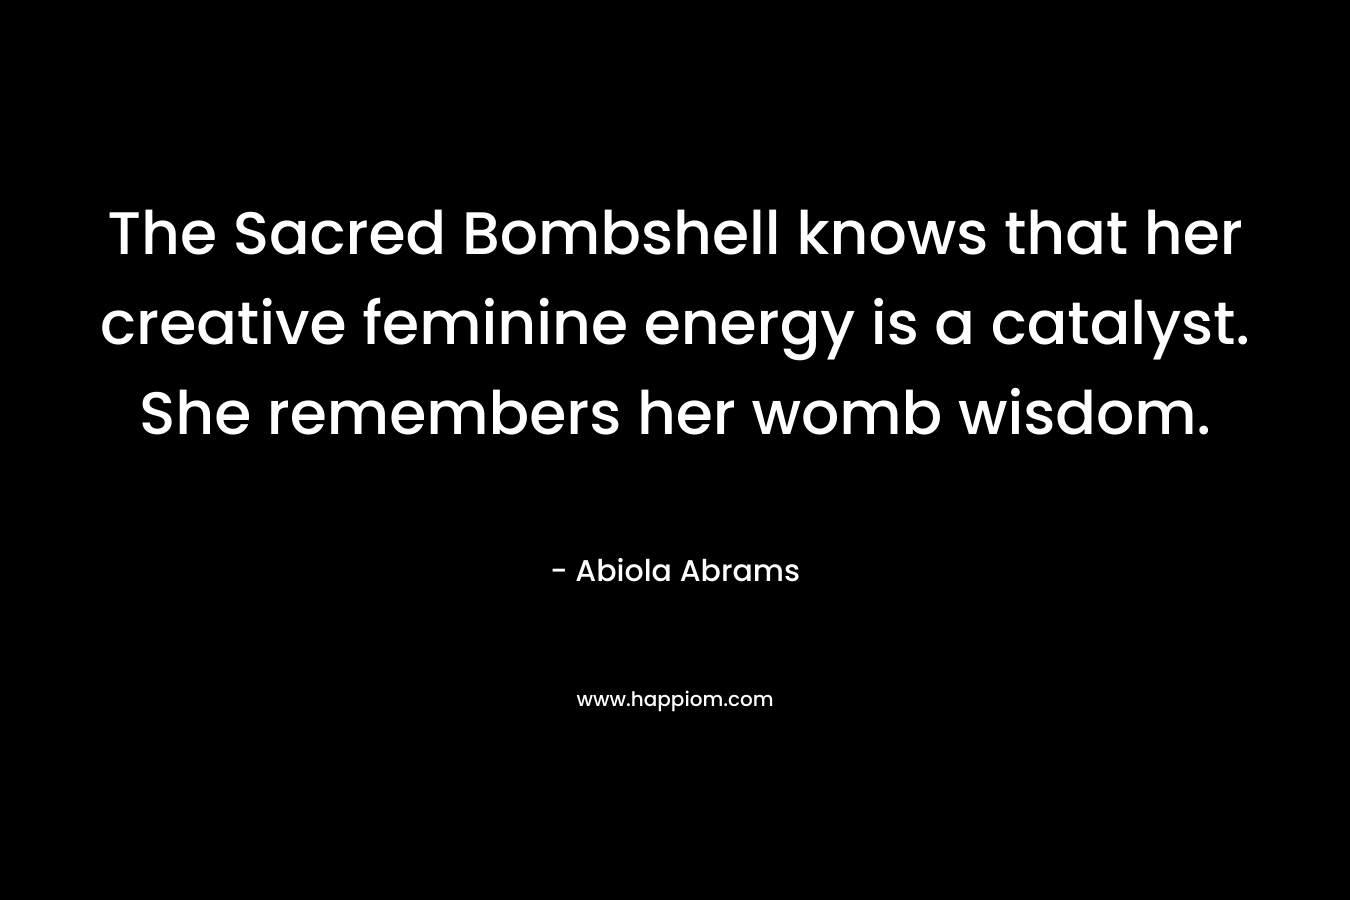 The Sacred Bombshell knows that her creative feminine energy is a catalyst. She remembers her womb wisdom. – Abiola Abrams